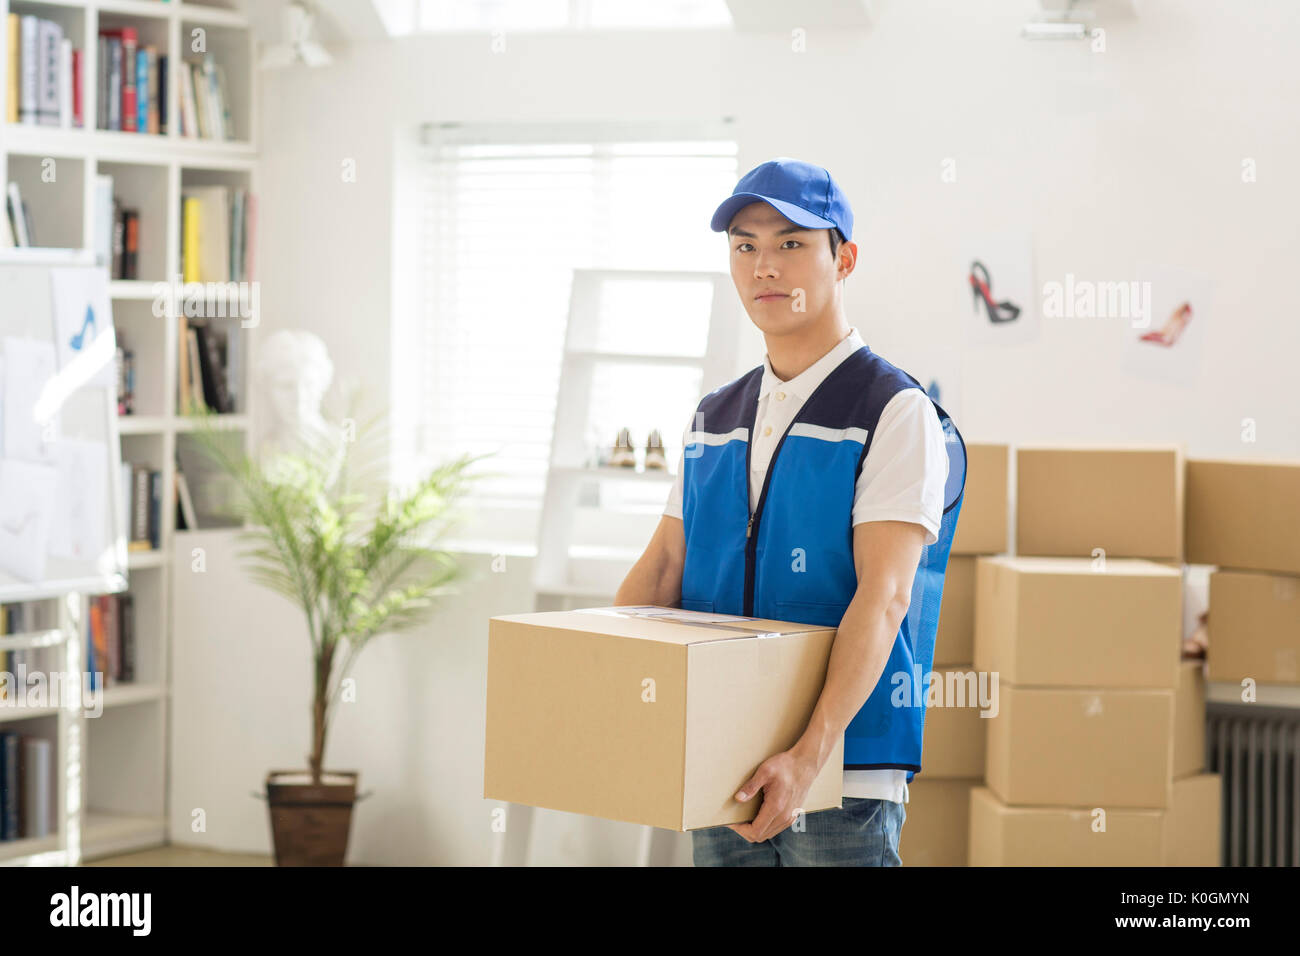 Young delivery man holding a box Stock Photo